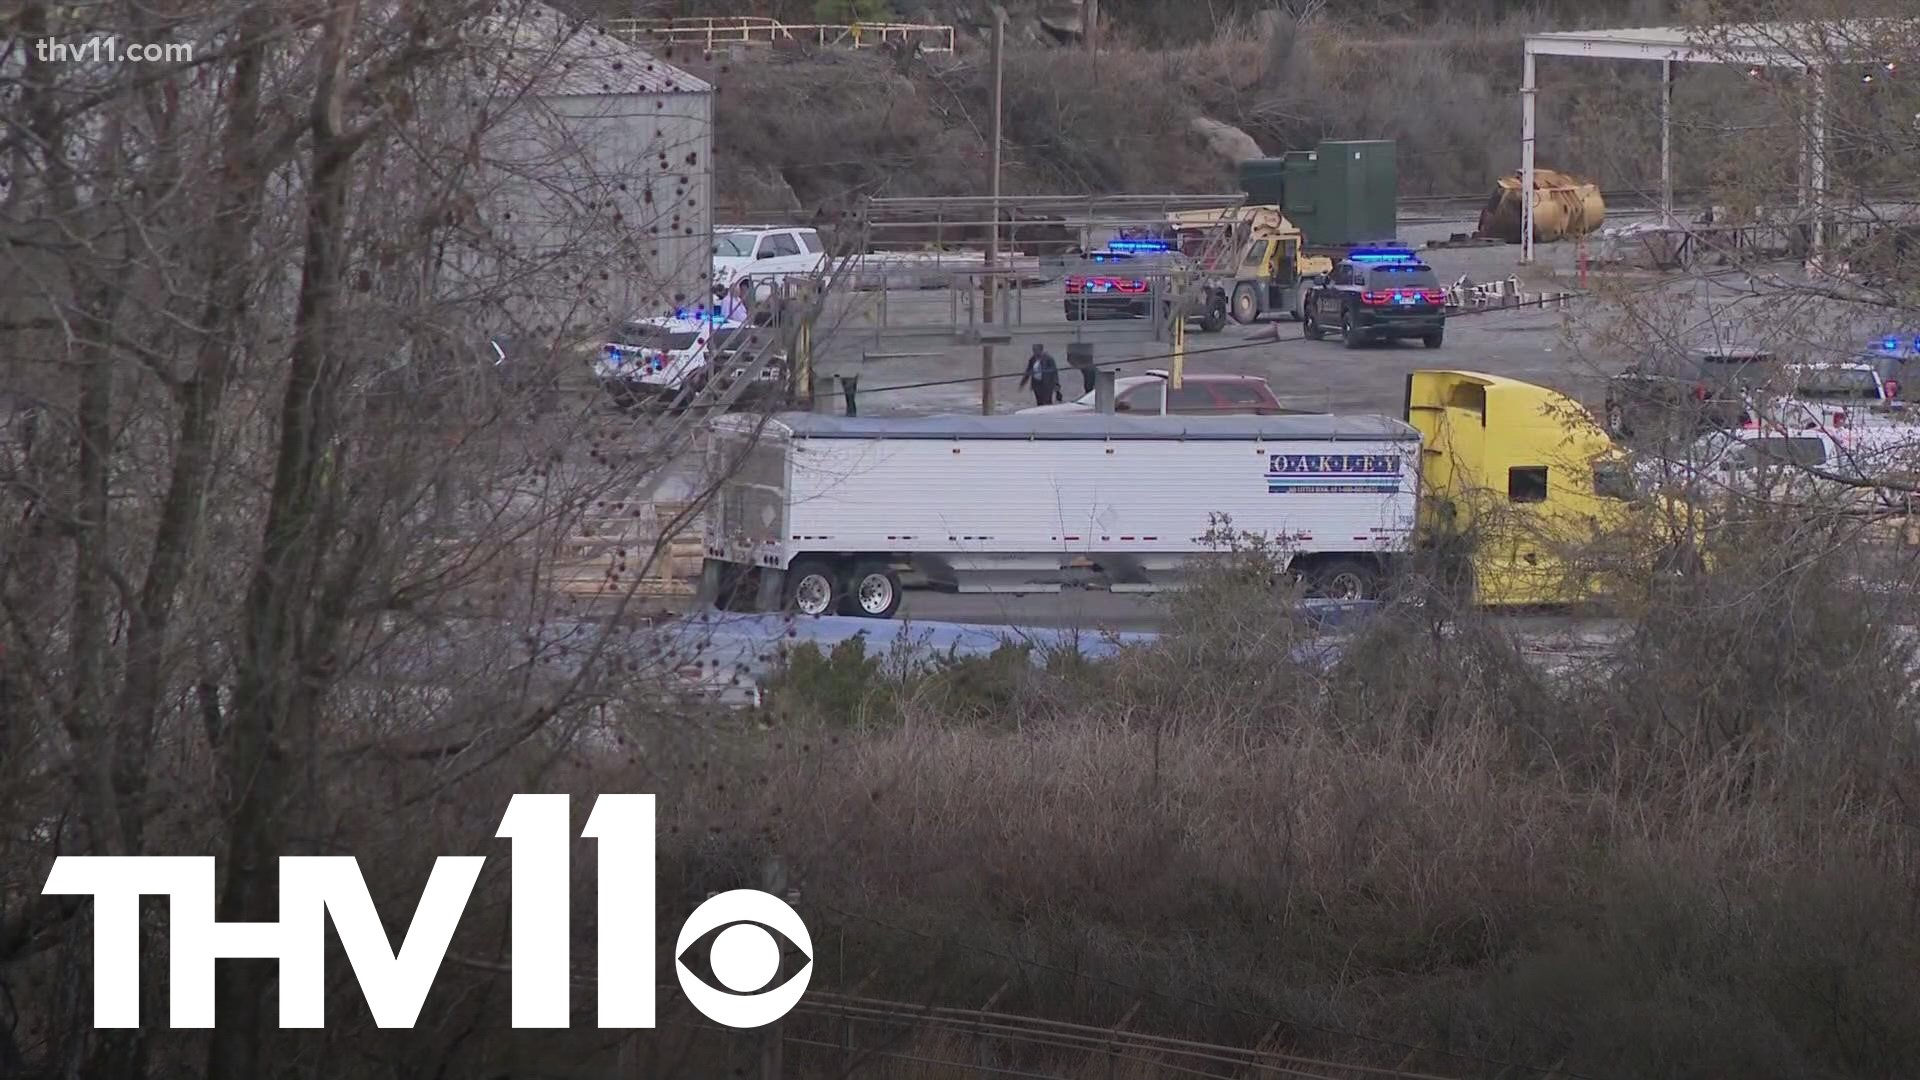 Officials in Little Rock are now trying to put the pieces together and figure out what happened after a plane crash killed five people that were on board.